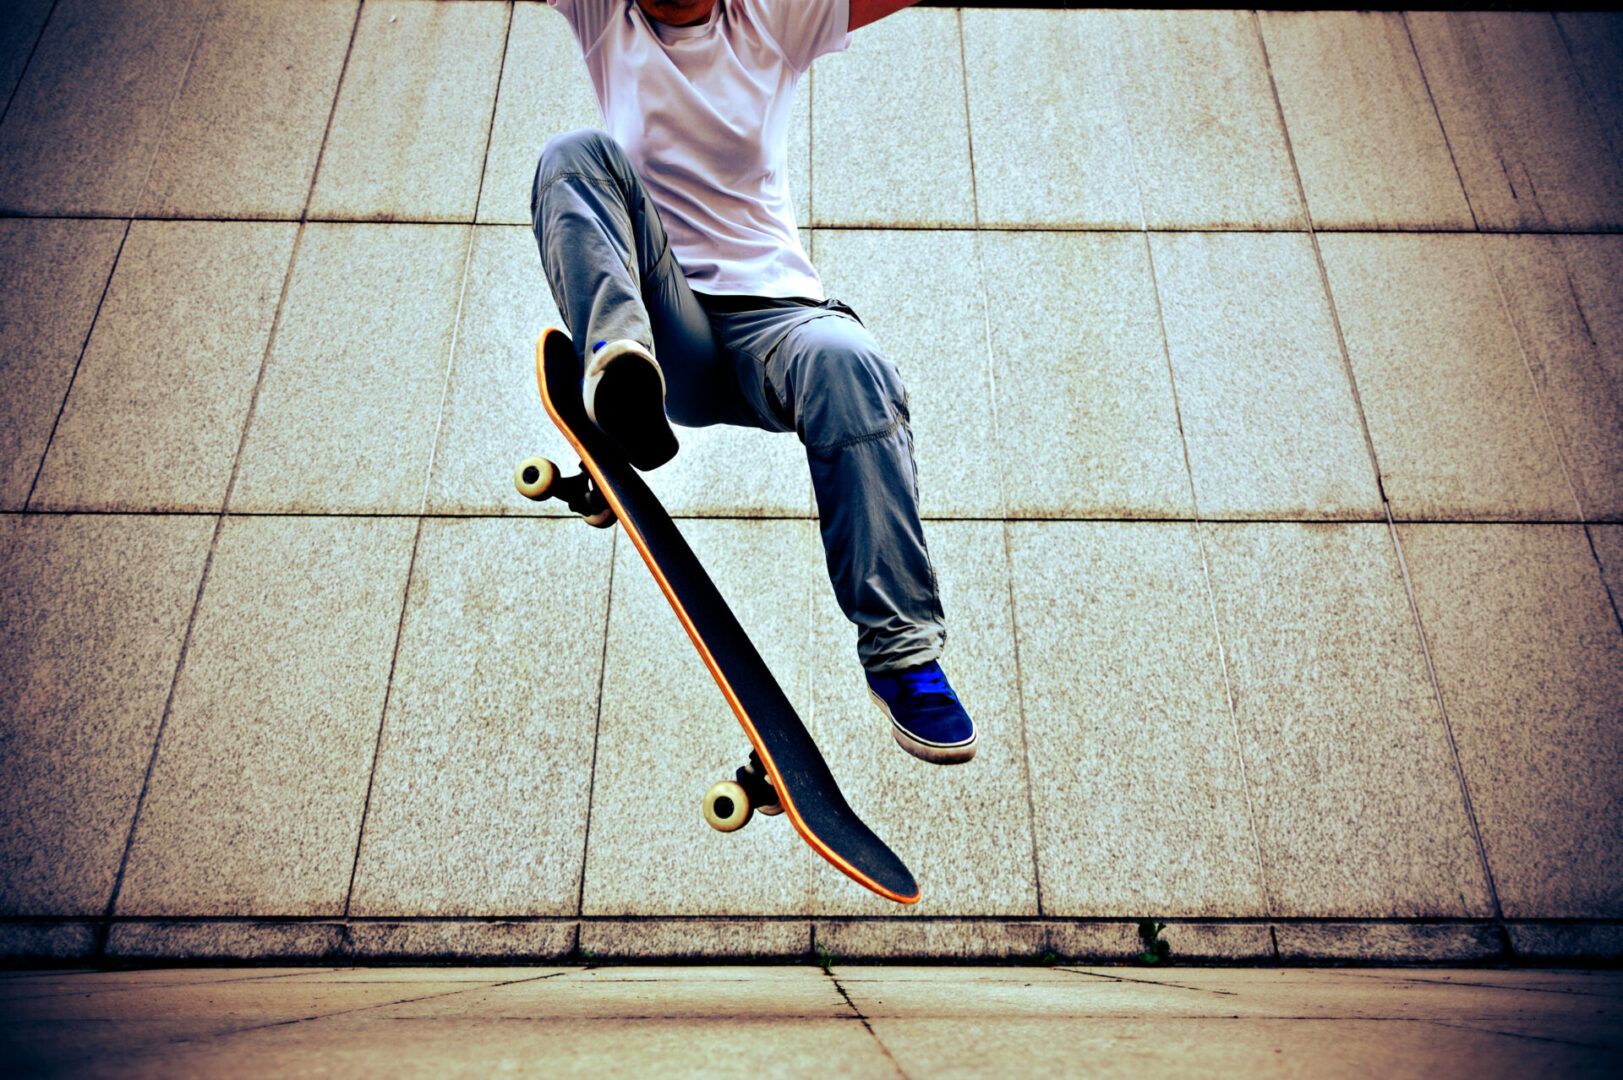 A Man Jumping on a Skateboardin SHoes